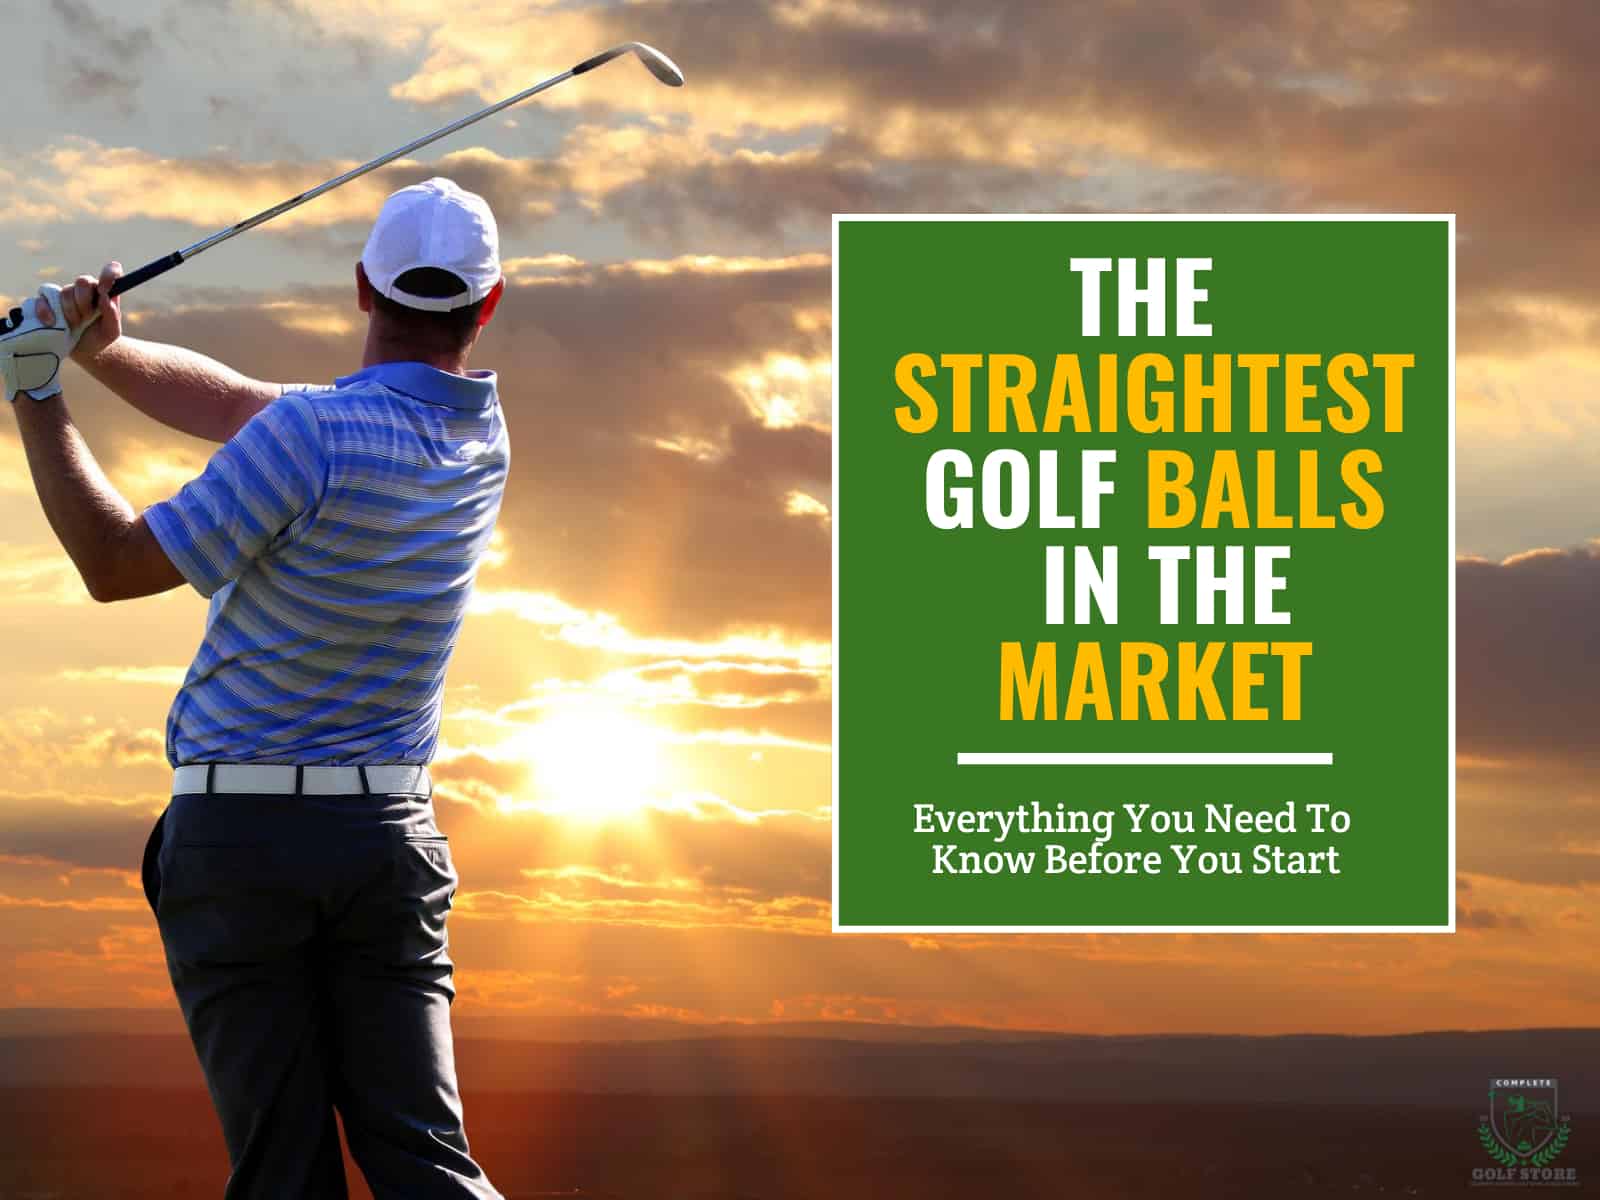 The straightest golf balls in the market